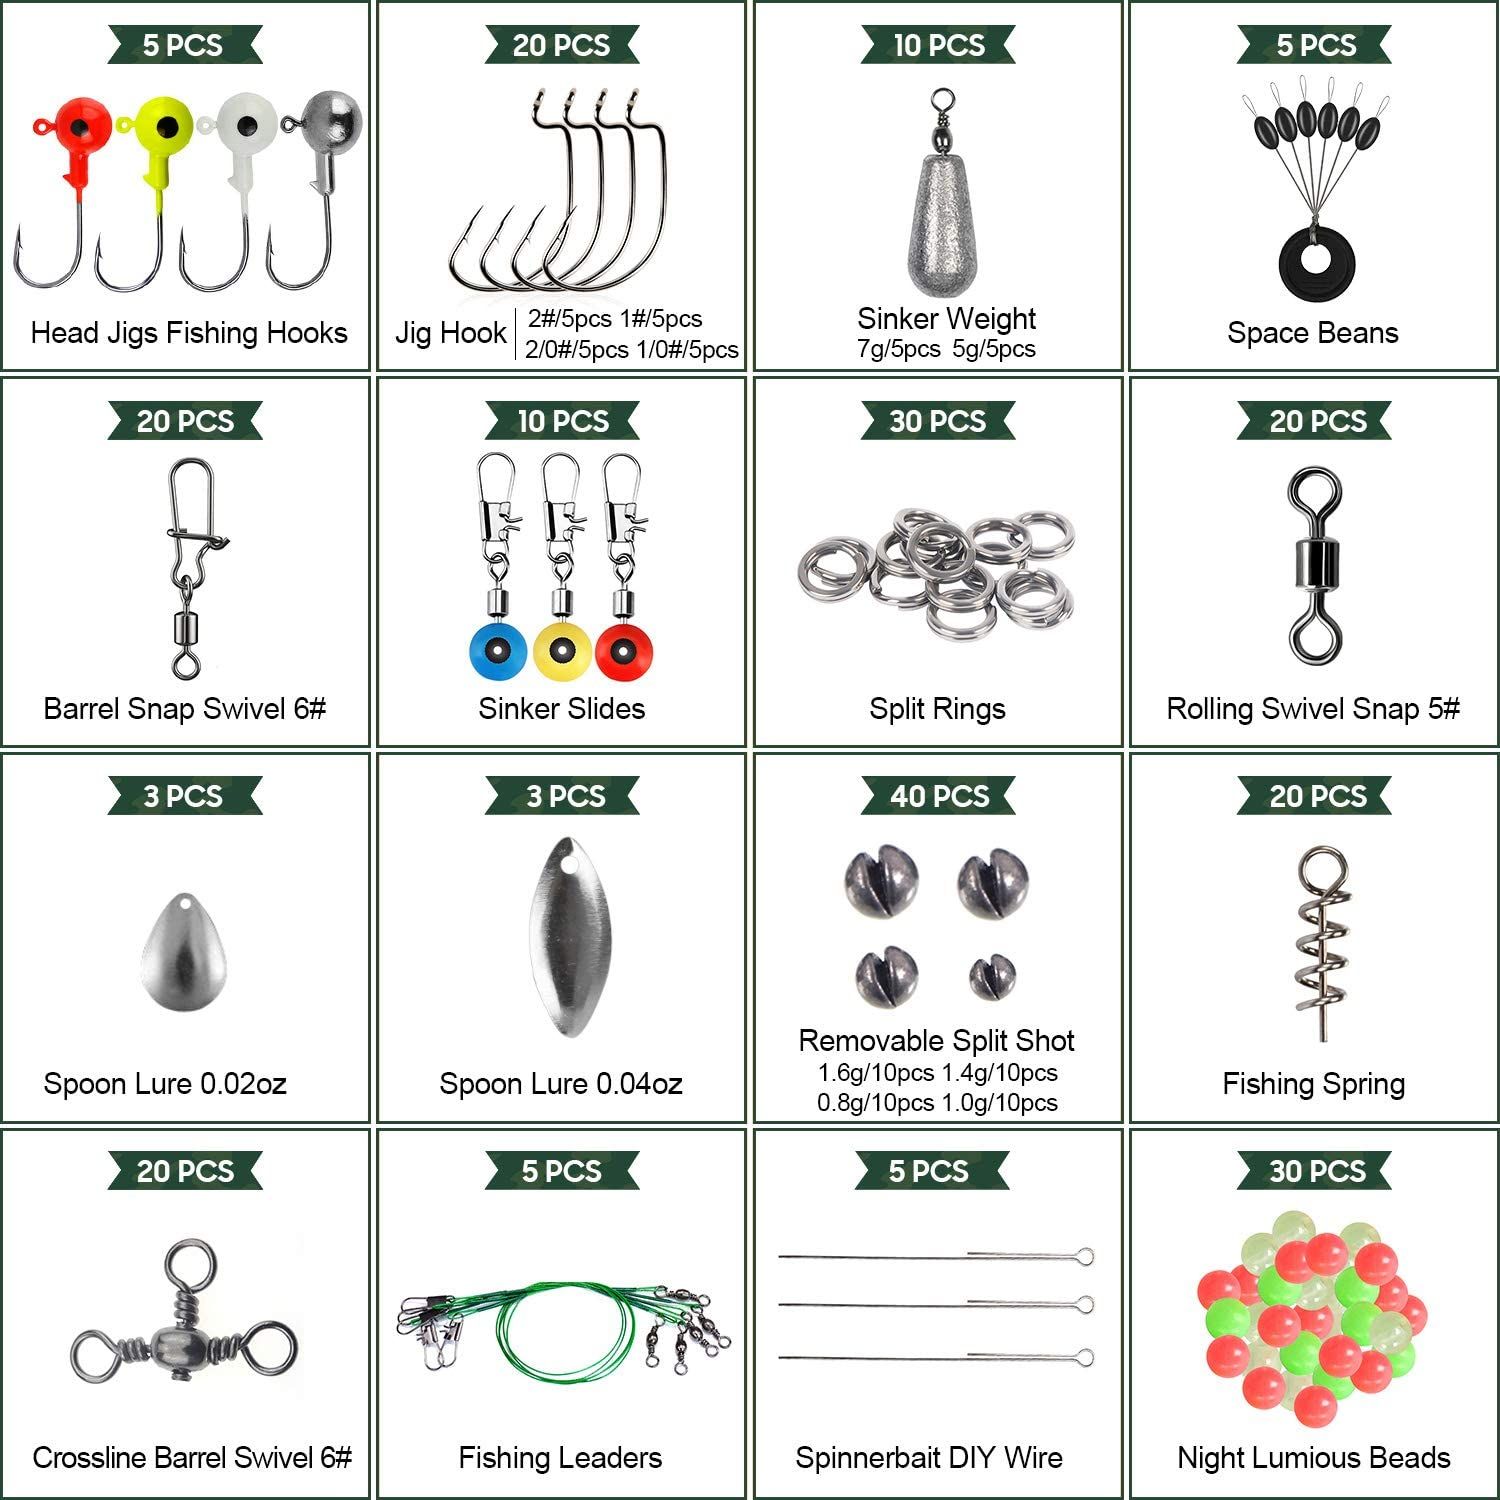 🅢🅖 🅢🅣🅞🅒🅚 Fishing Accessories Equipment Kit Rig Set Including Sinker  Bullet Weights,Fishing Swivels Snap,Sinker Slides,Jig Hook,Fishing Tackle  Box for